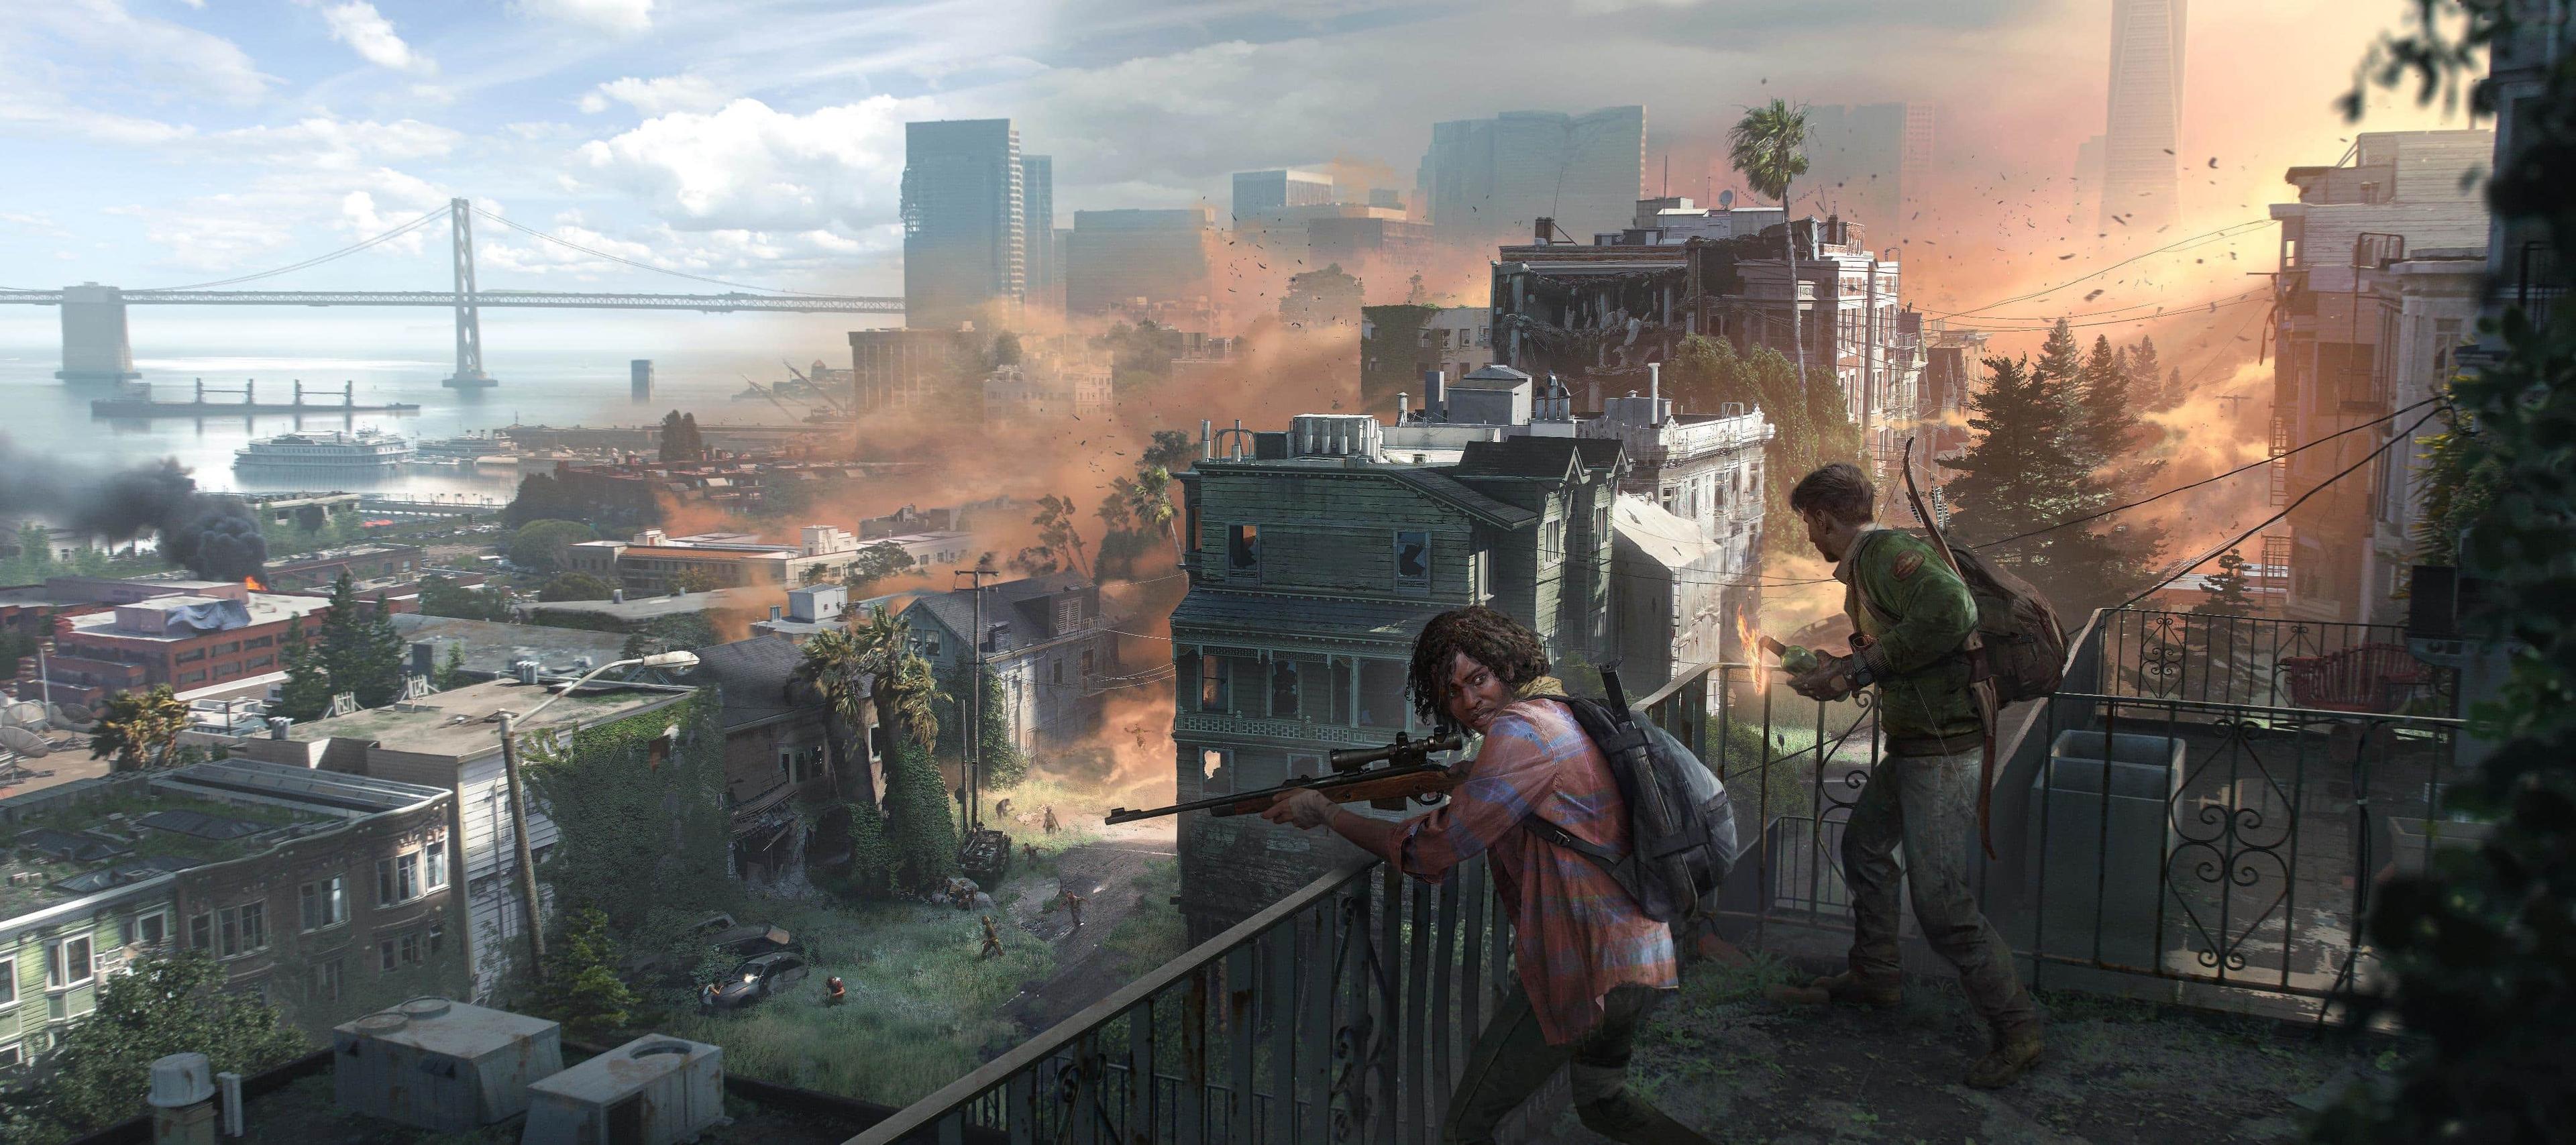 The Last of Us standalone multiplayer title concept art